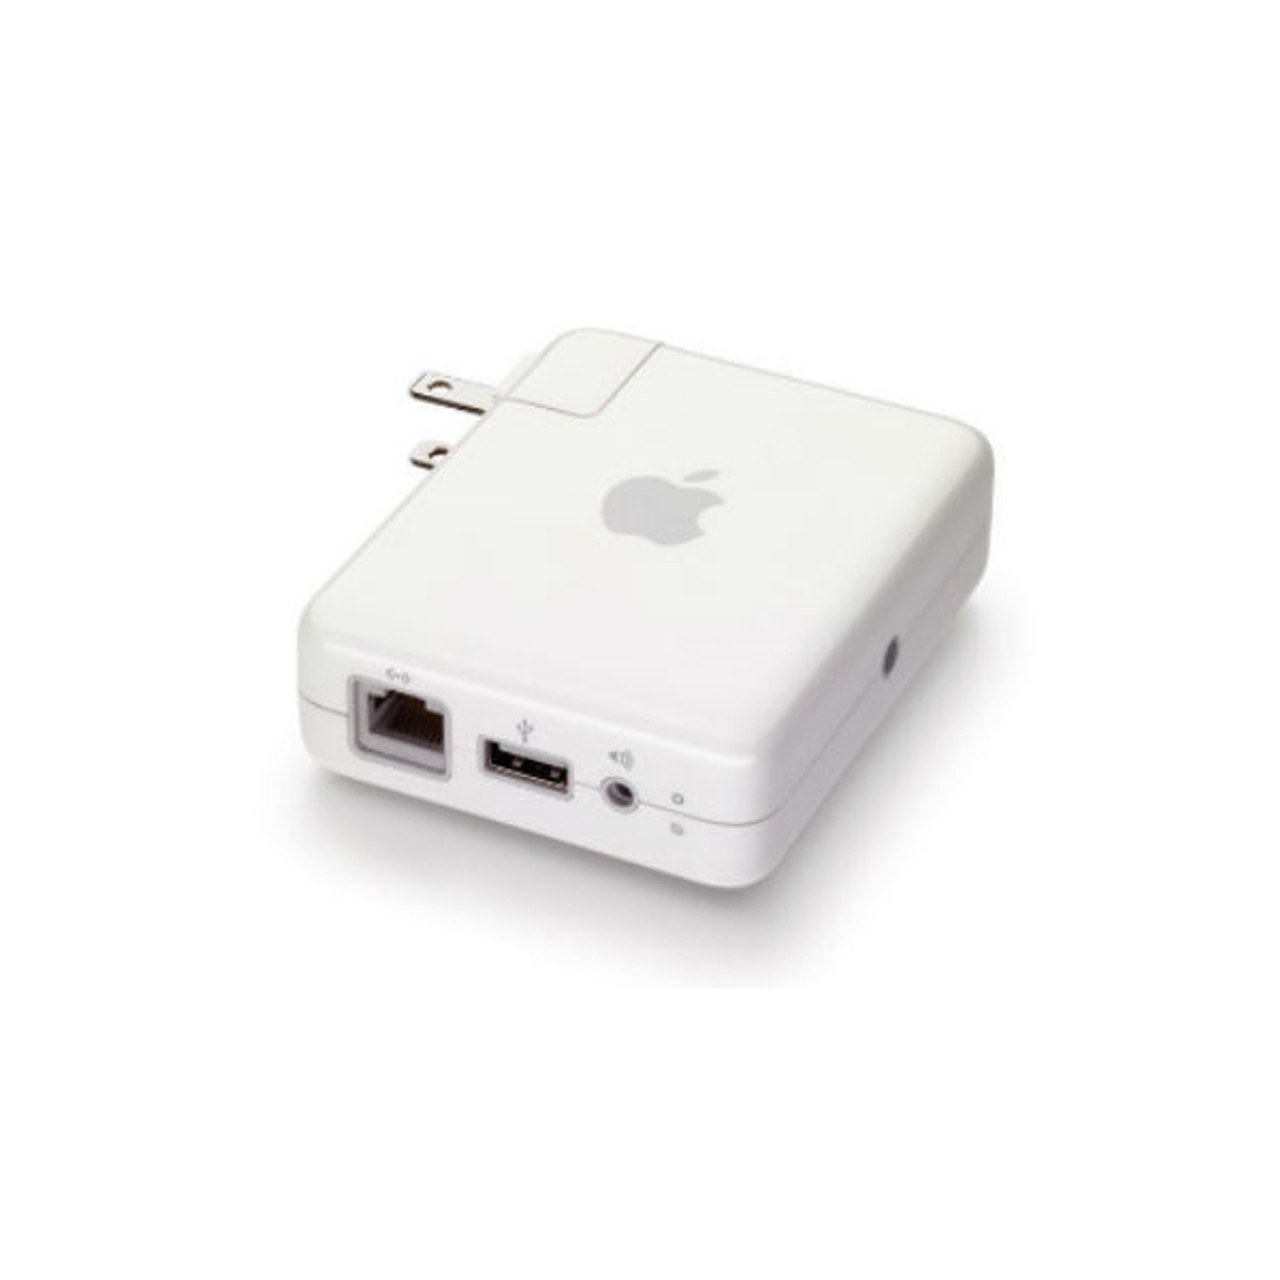 Inficere uformel Sympatisere Apple AirPort Express Router 802.11n (1st Generation) MB321LL/A | mac of  all trades